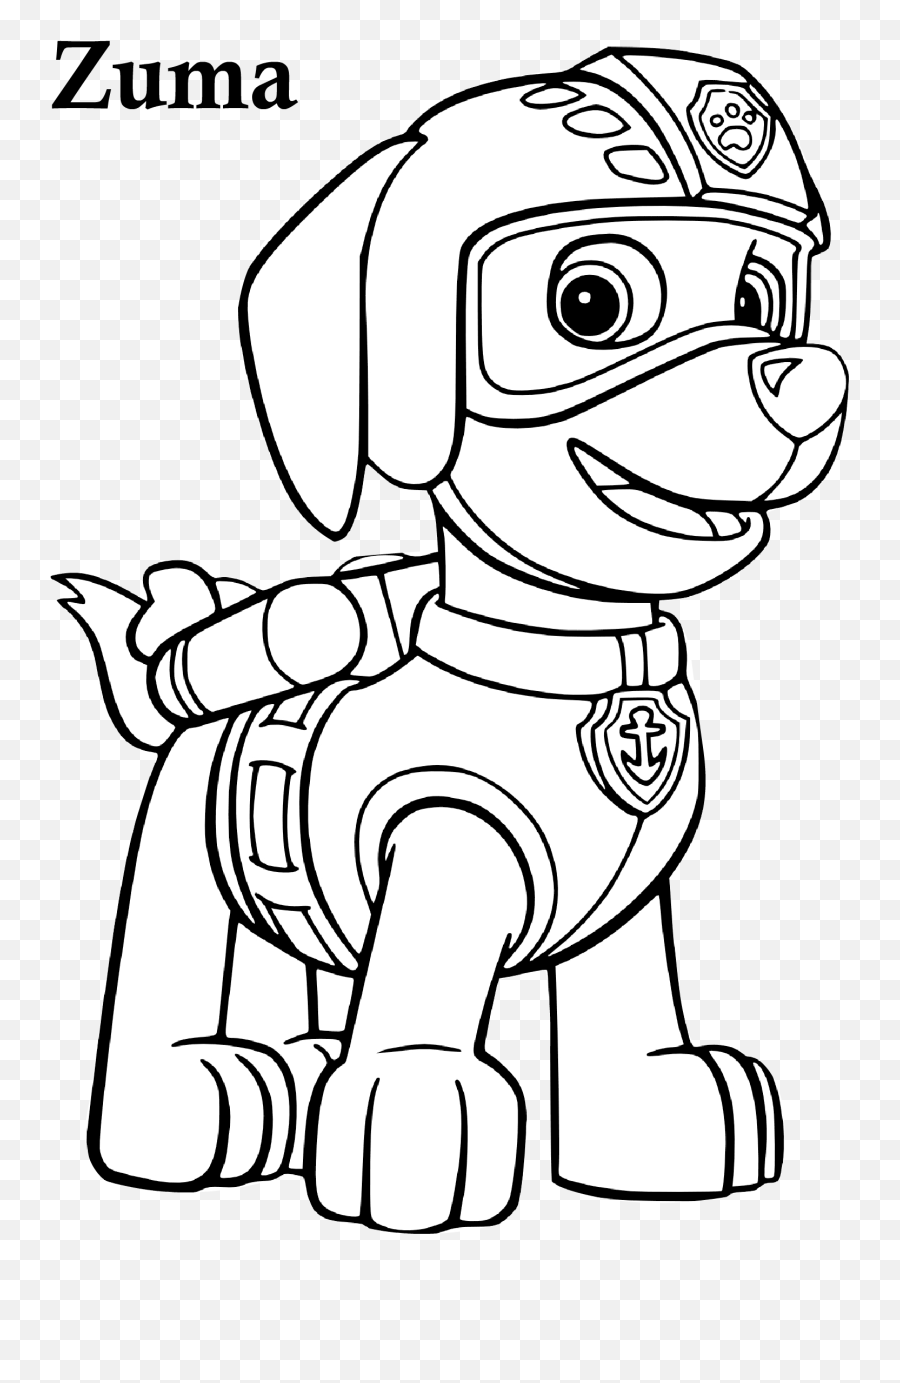 Marshall And Zuma Coloring Page - Free Coloring Library Paw Patrol Zuma Colouring Pages Emoji,Printable Emotions Coloring Pages